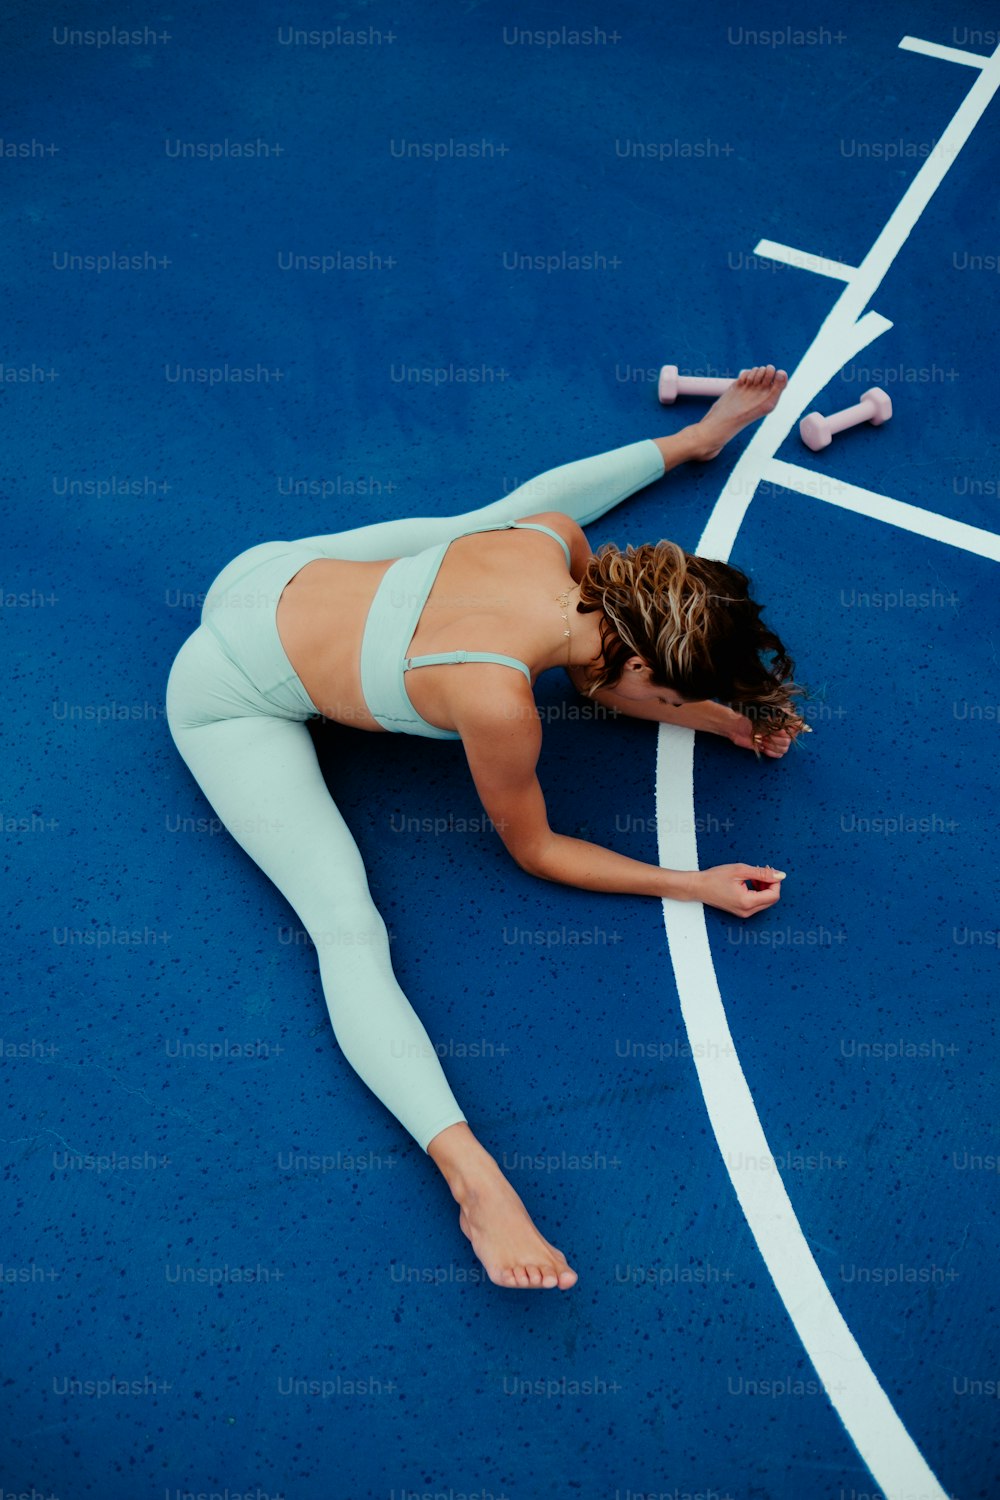 a woman is laying on a tennis court